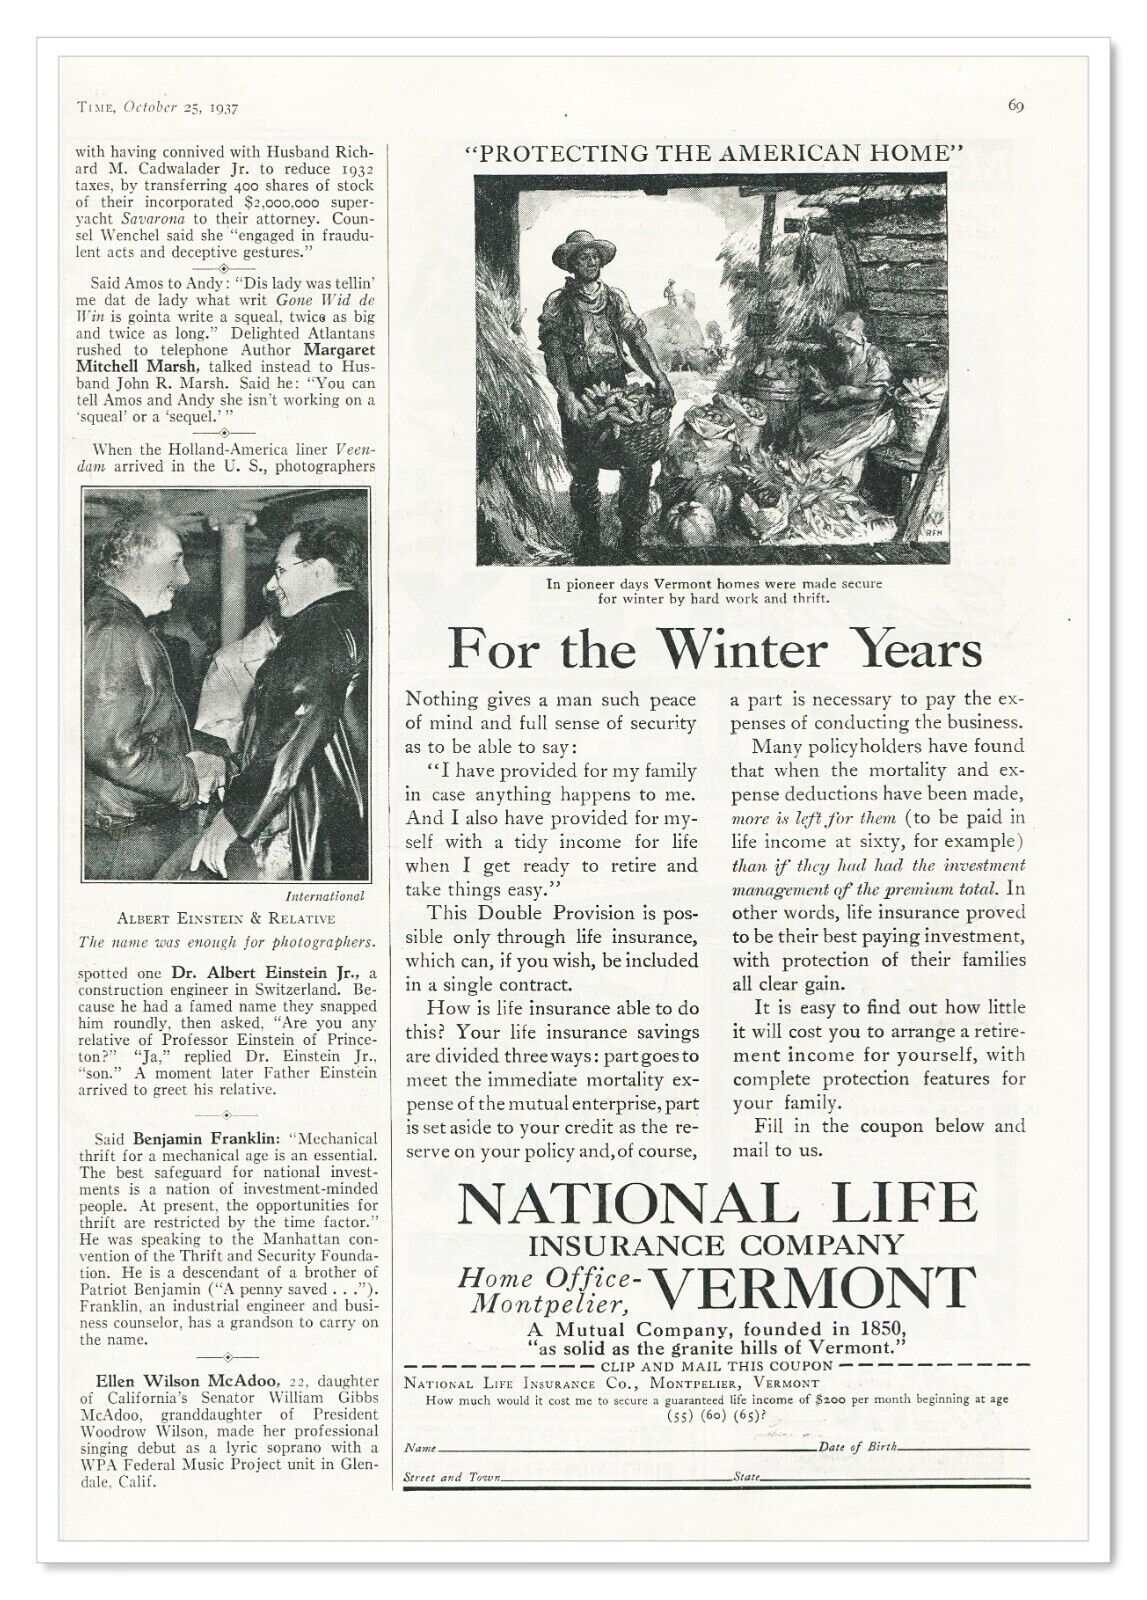 Print Ad National Life Insurance Vermont Vintage 1937 3/4-Page Advertisement